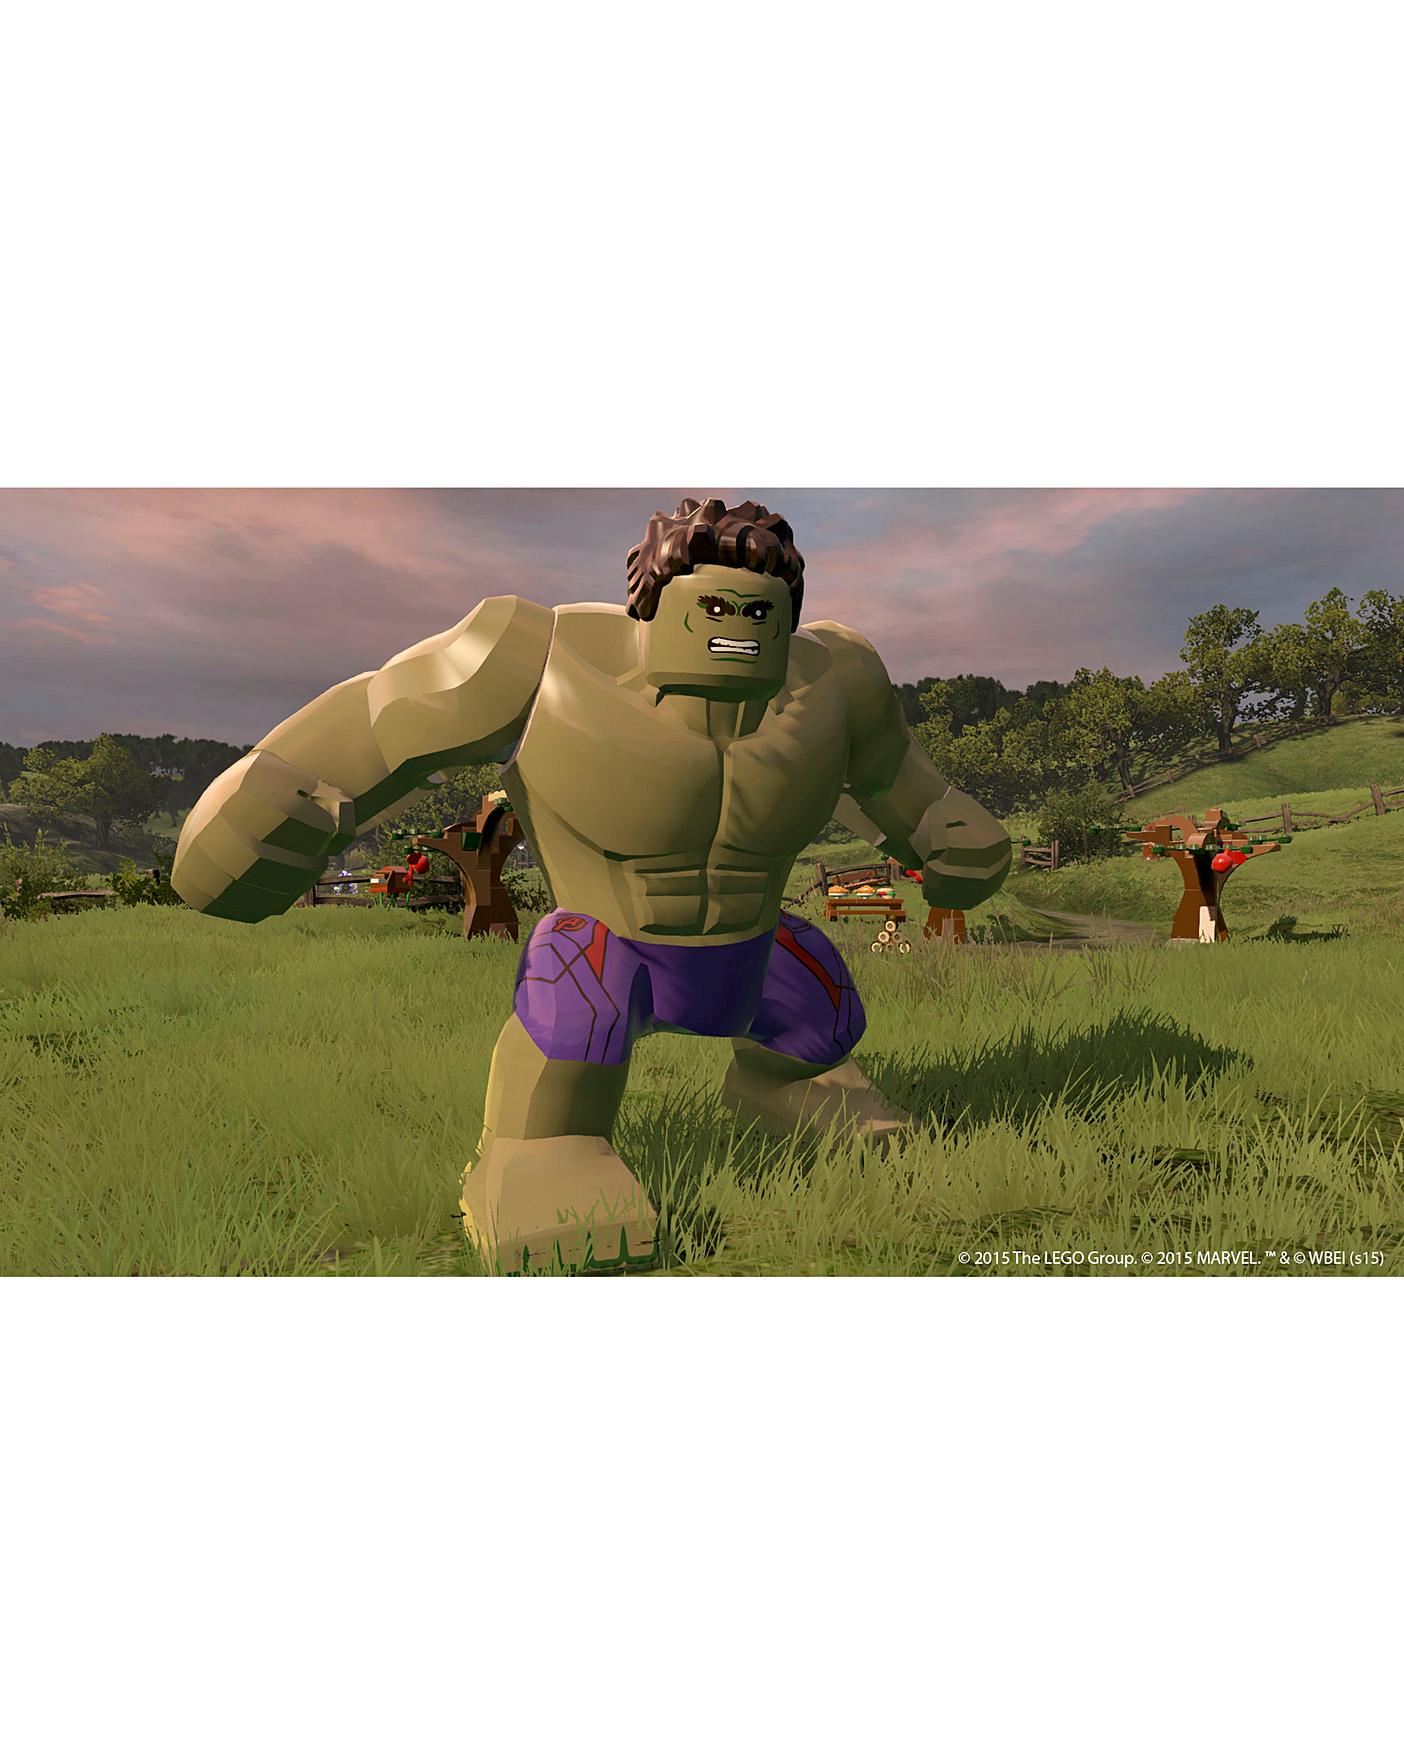 LEGO® Marvel's Avengers Game, Characters & Release Date